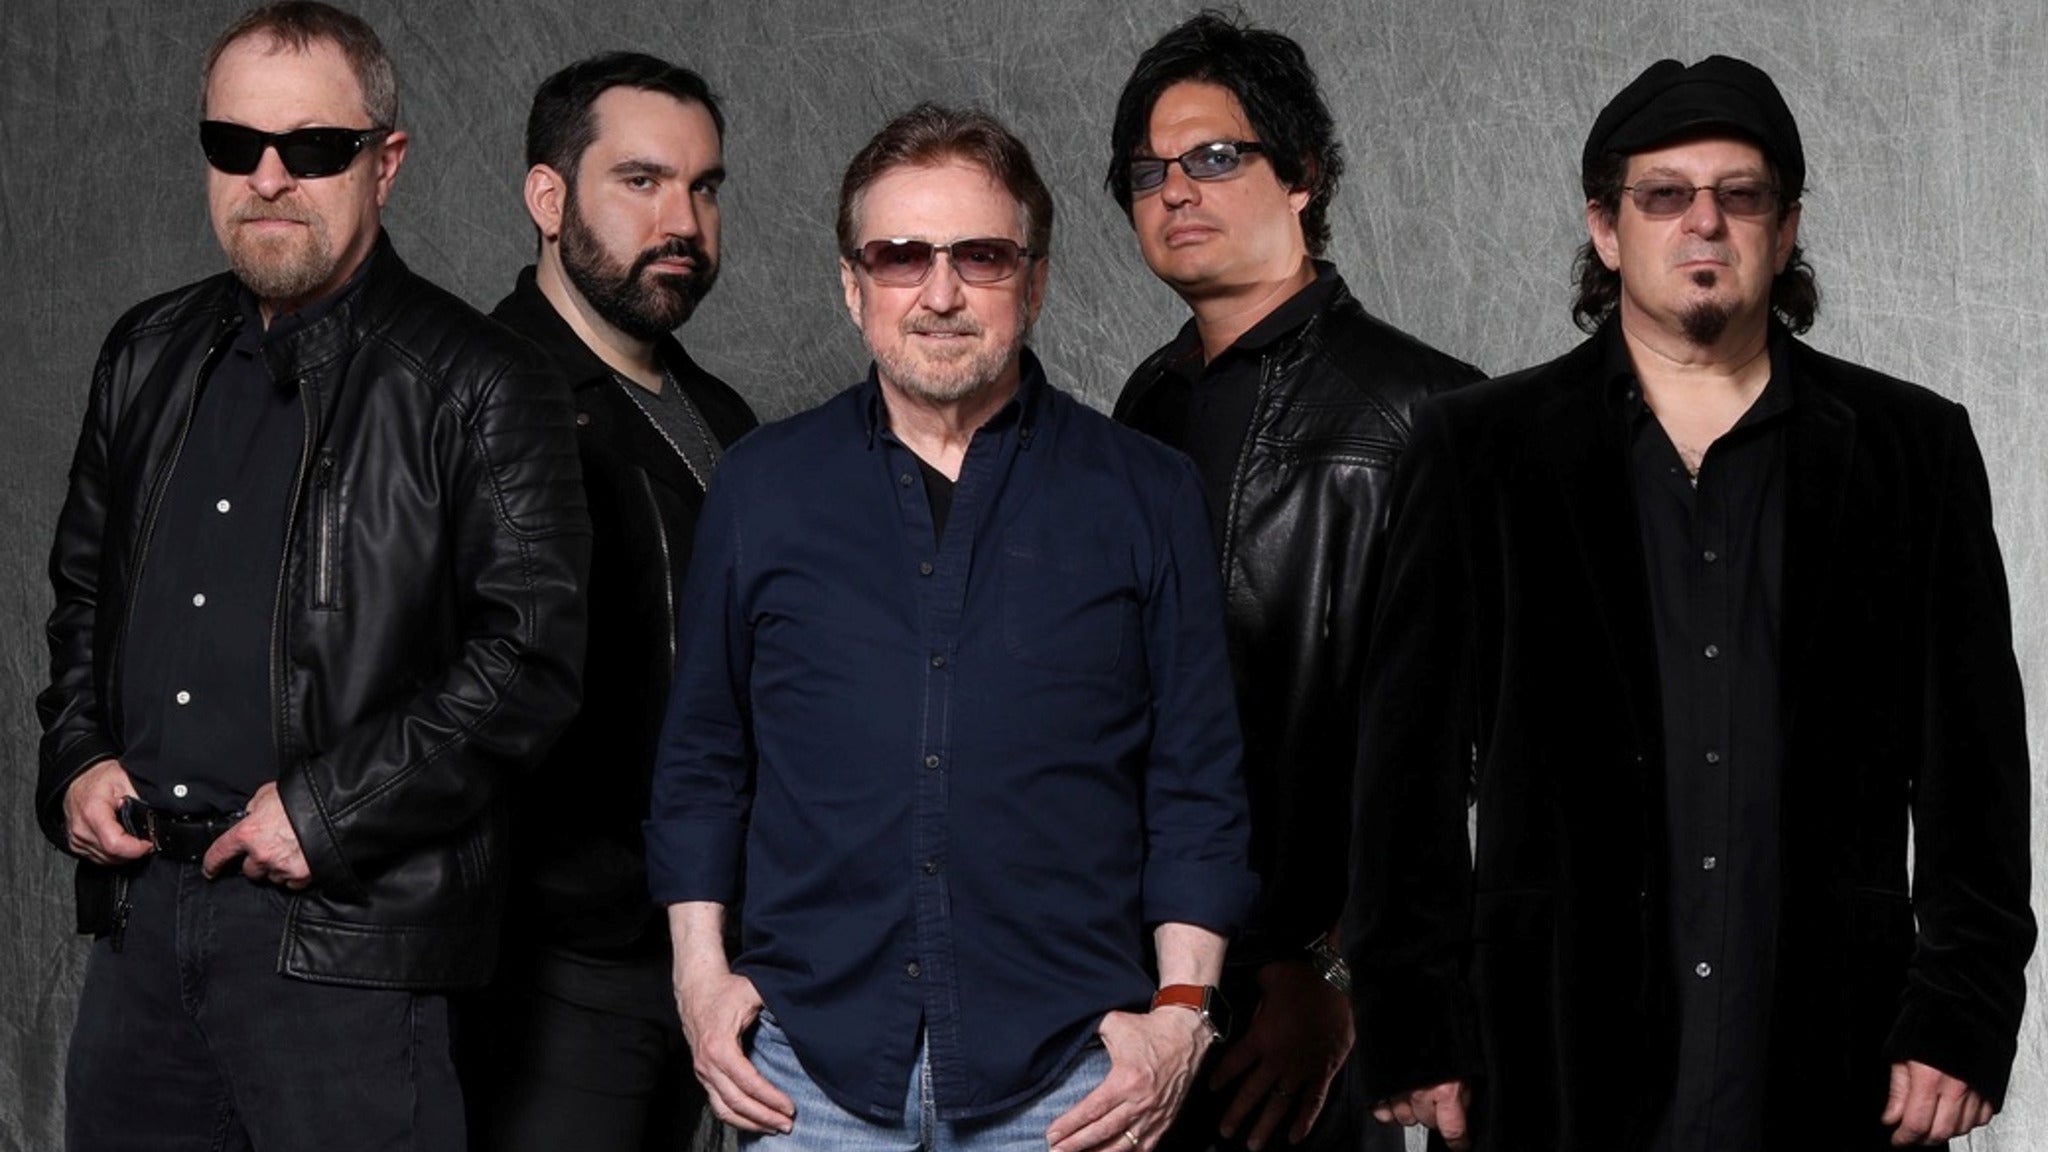 103.5 The Fox presents Blue Oyster Cult at Paramount Theatre